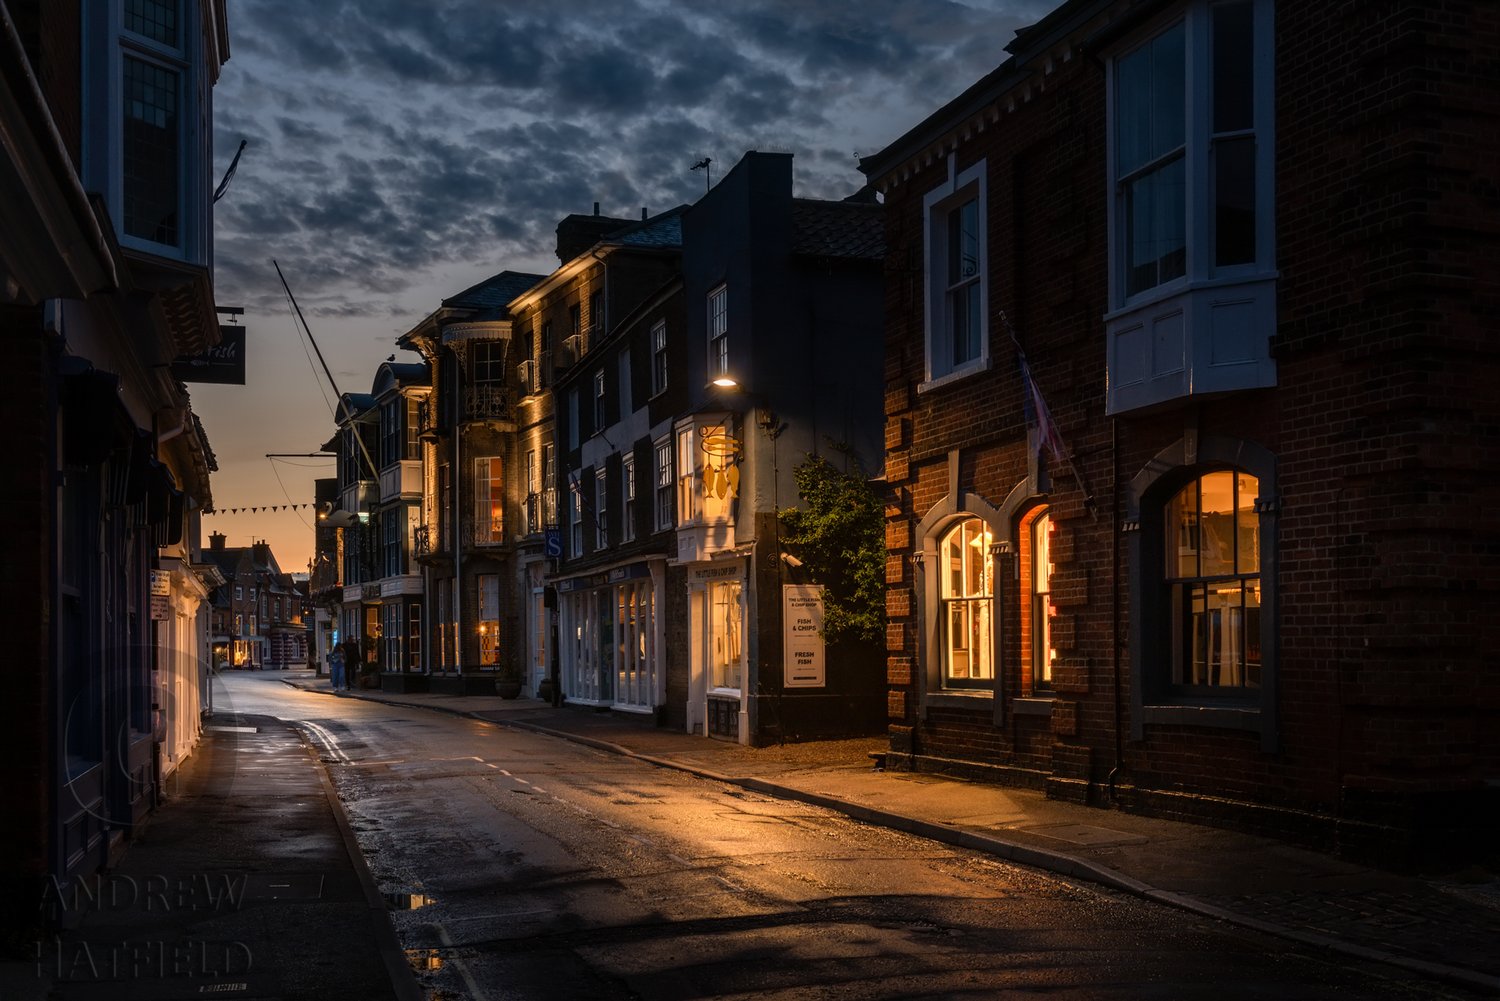 Architectural+image+showing+Southwold+High+Street+ay+night+looking+West+at+twilight+with+wet+roads+by+Andrew+Hatfield+AH9_5102.jpg